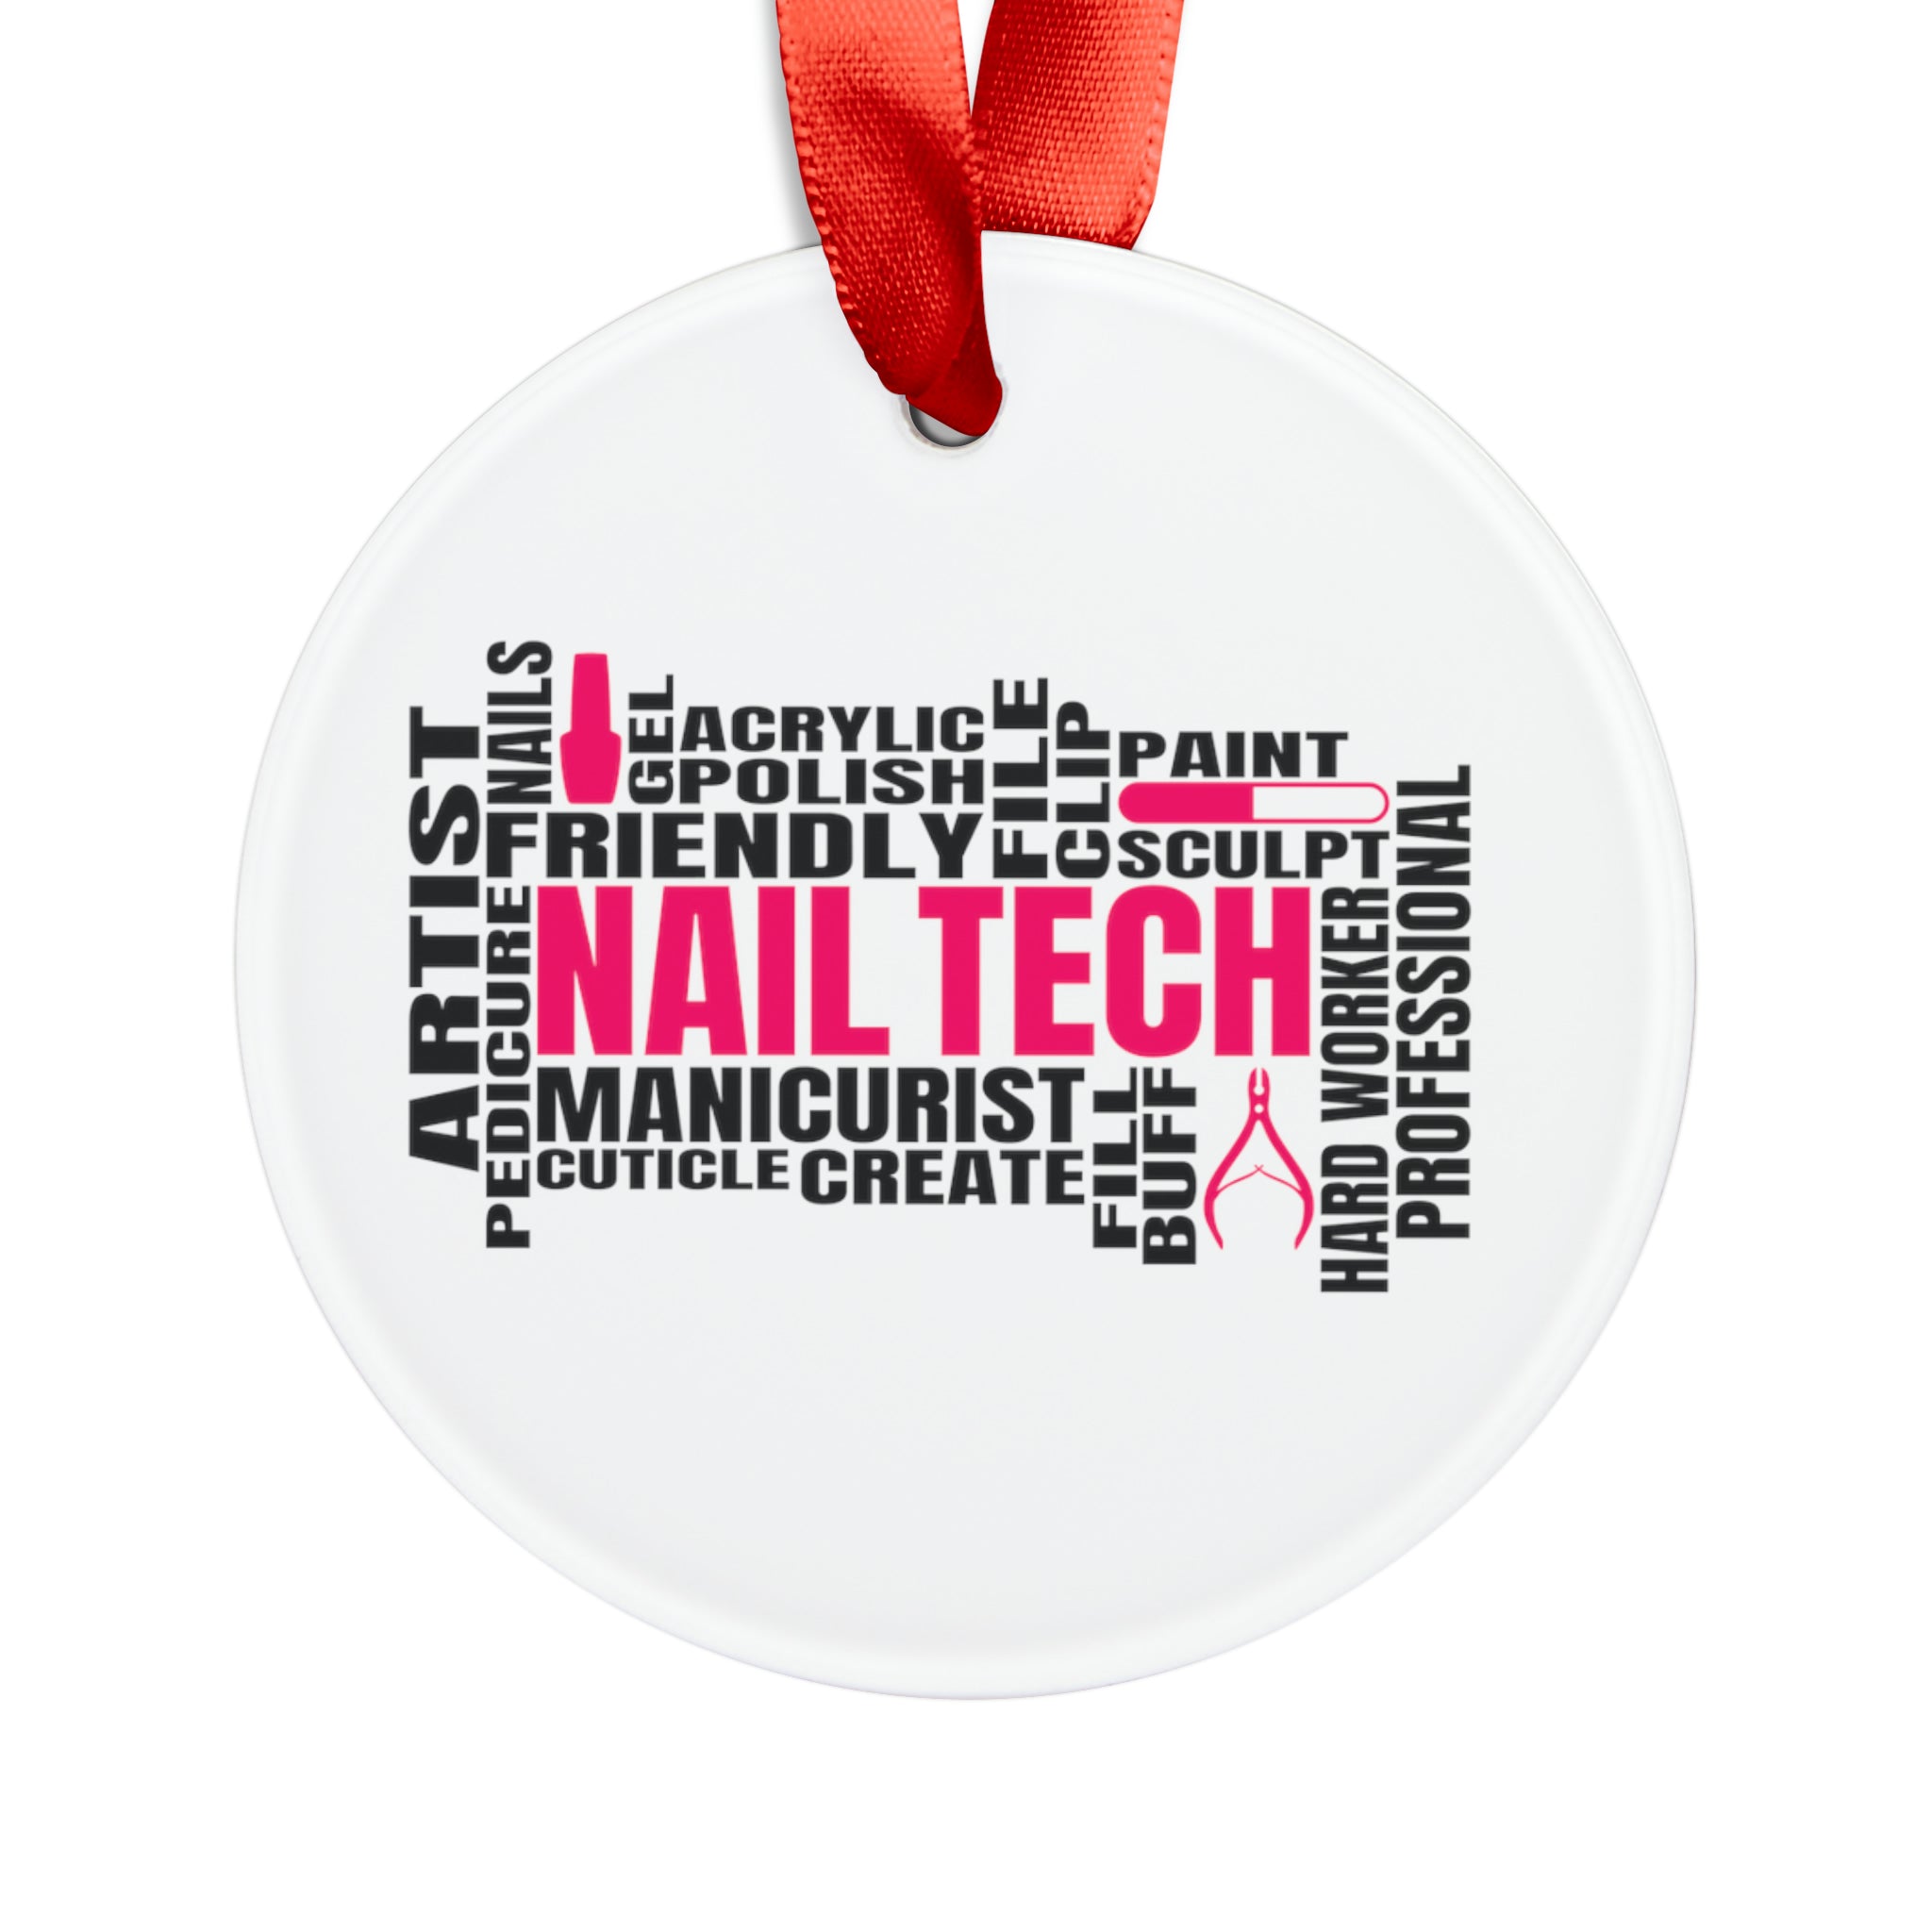 Nail Tech And Barber Wanted - Opportunities For Young Kenyans